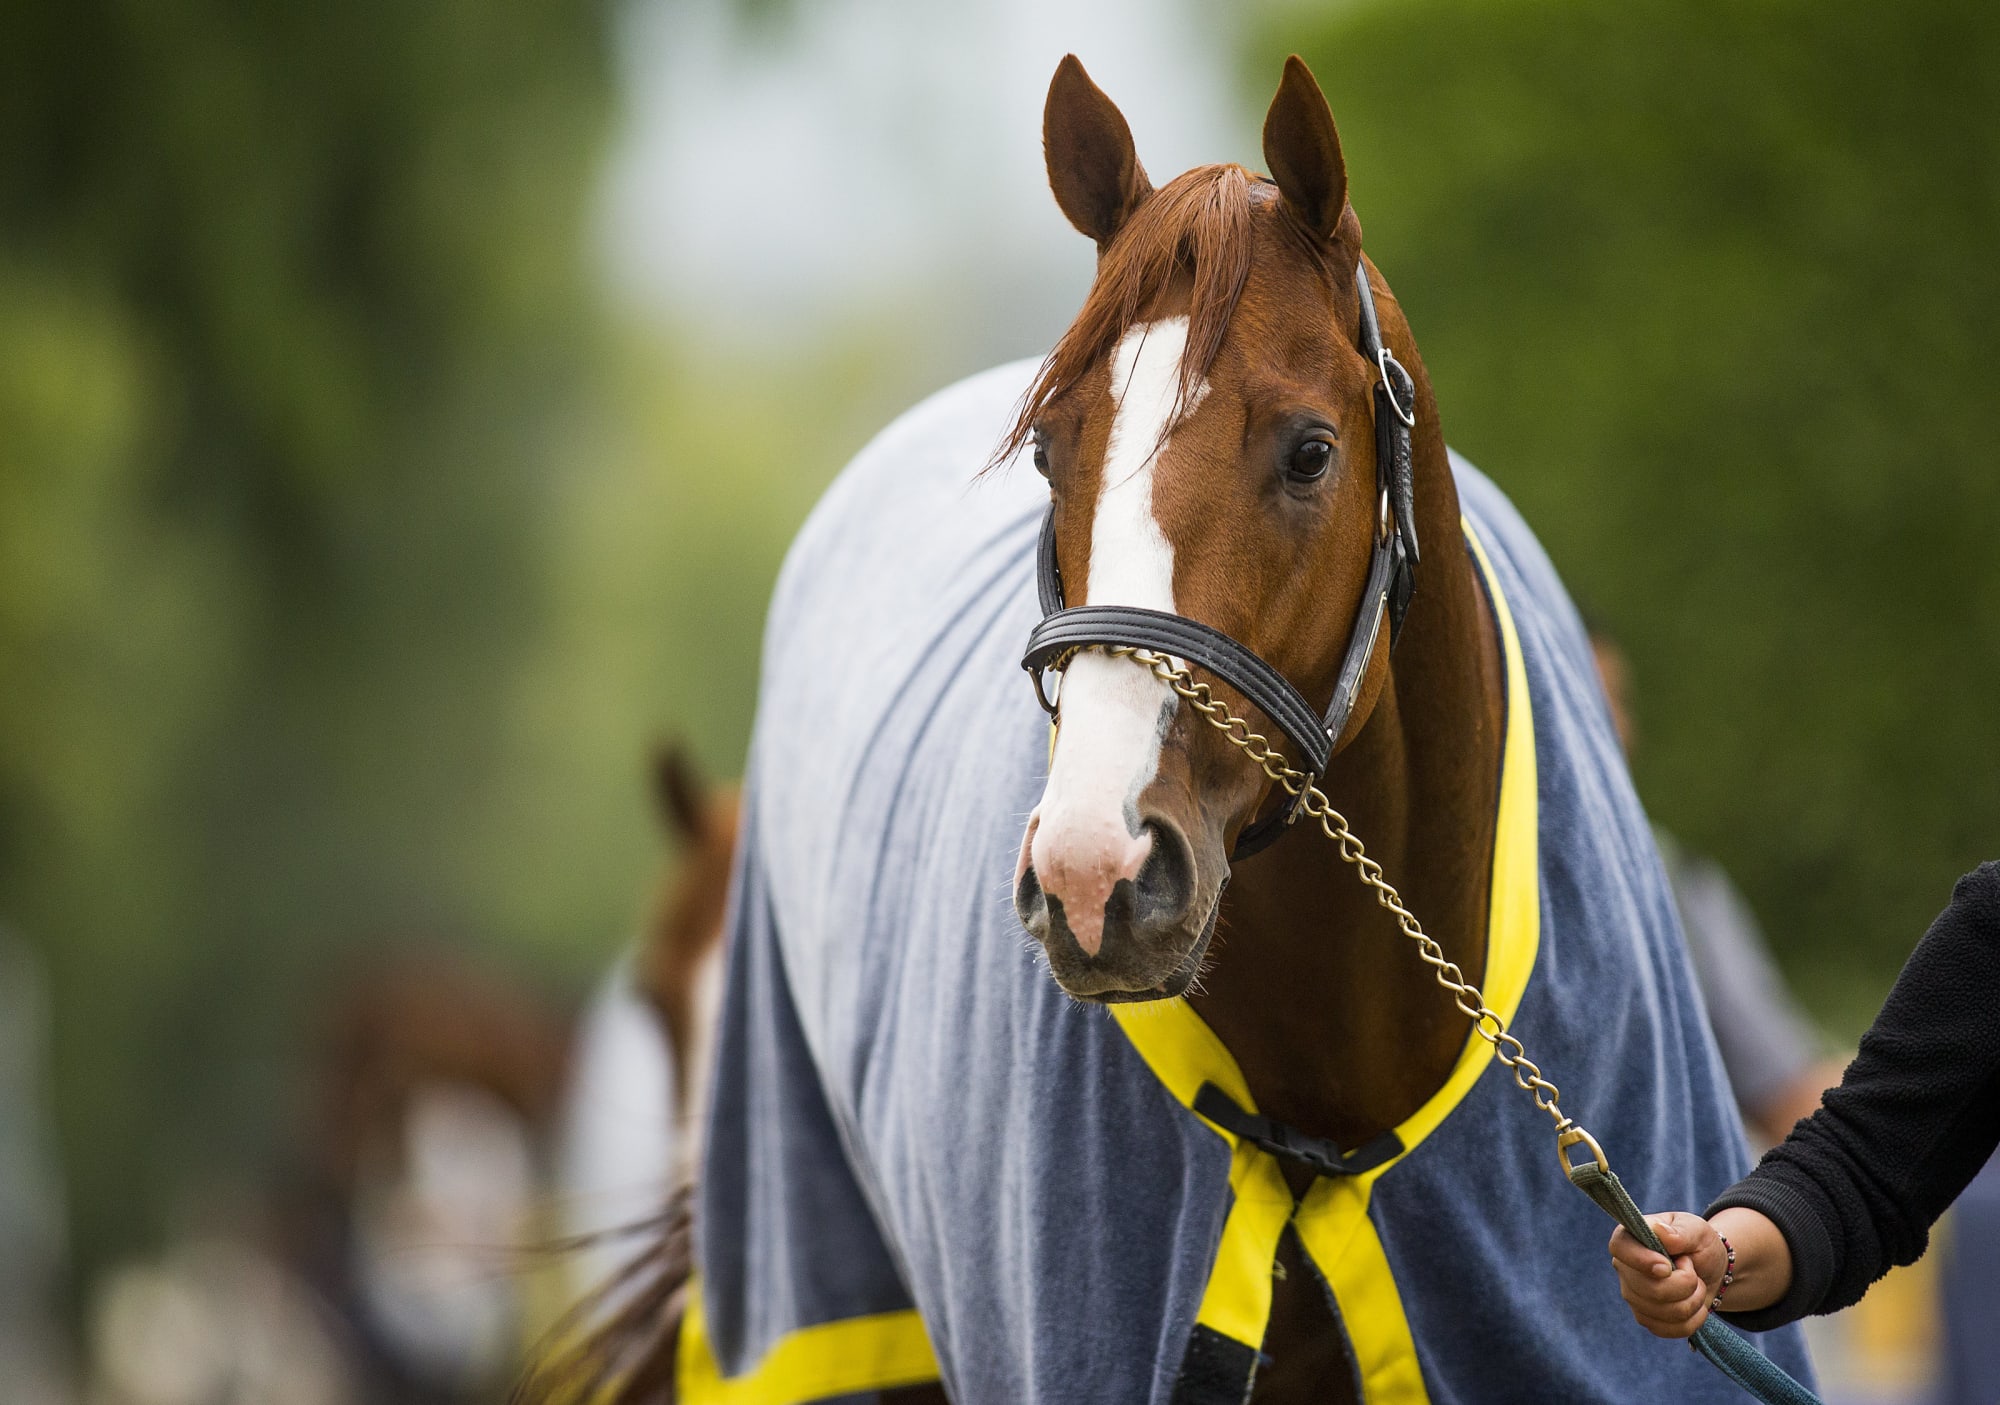 What is the average age of a thoroughbred horse